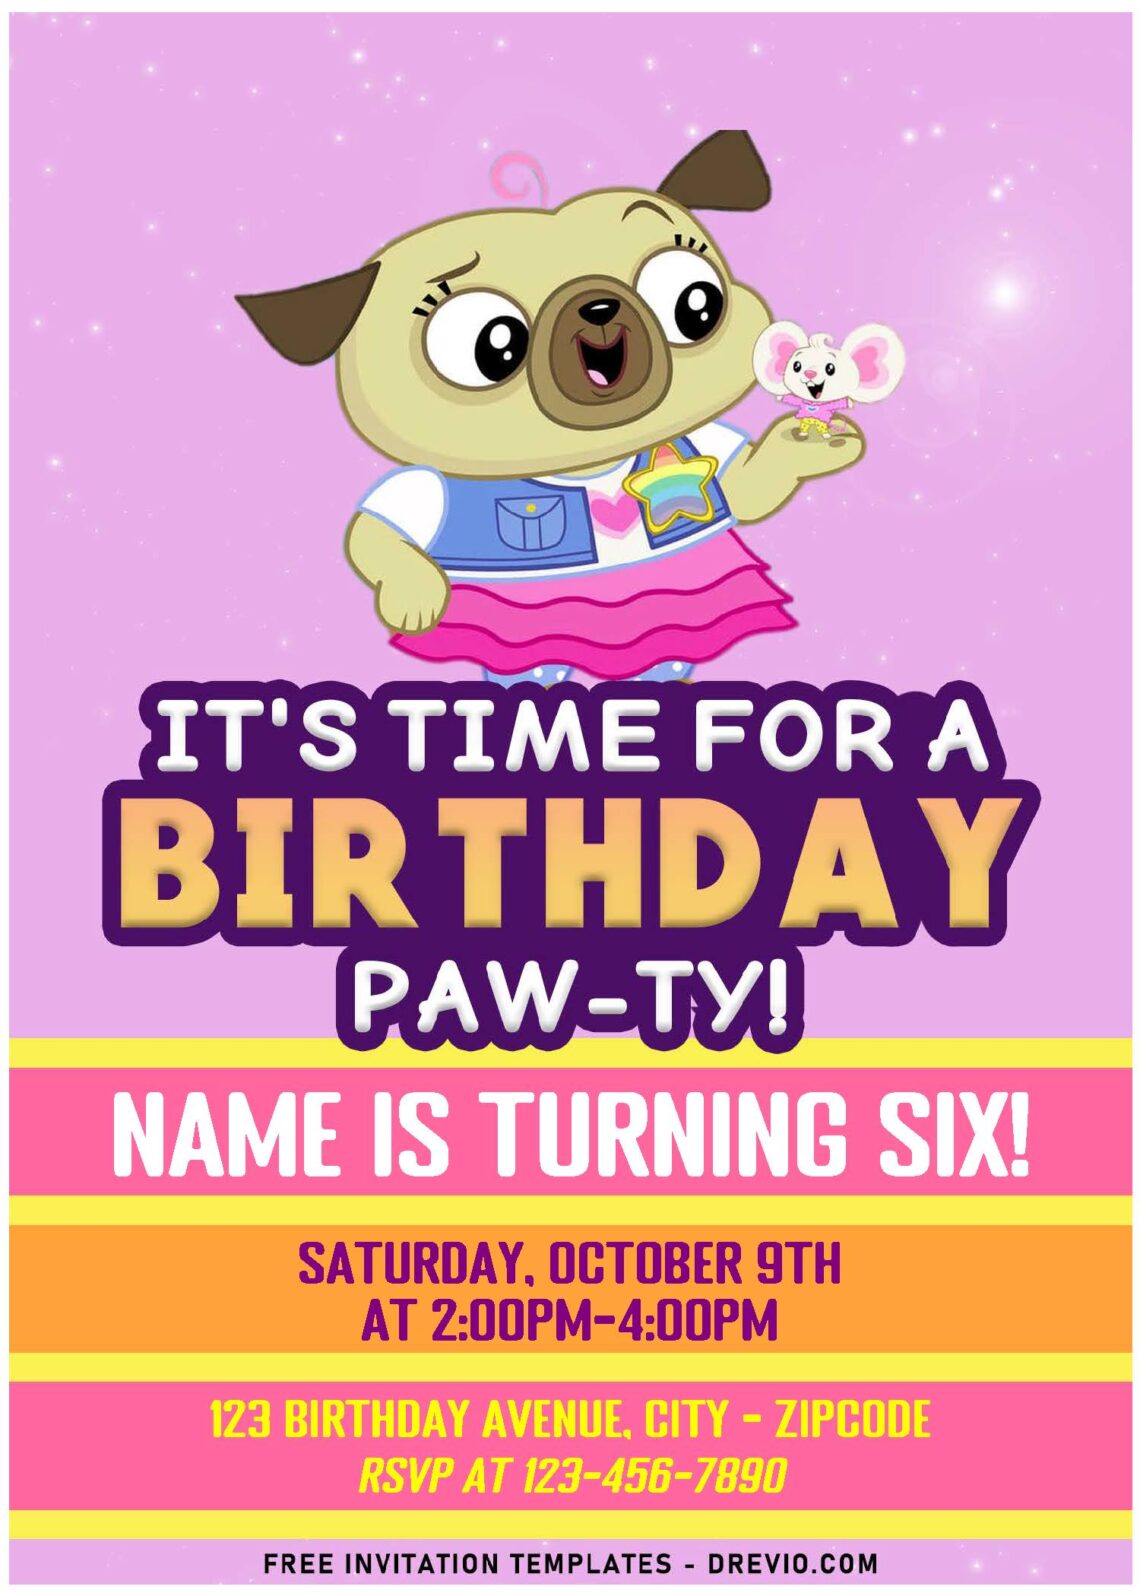 (Free Editable PDF) Lovable Pug Chip And Potato Birthday Invitation Templates with lovable pug and her mouse